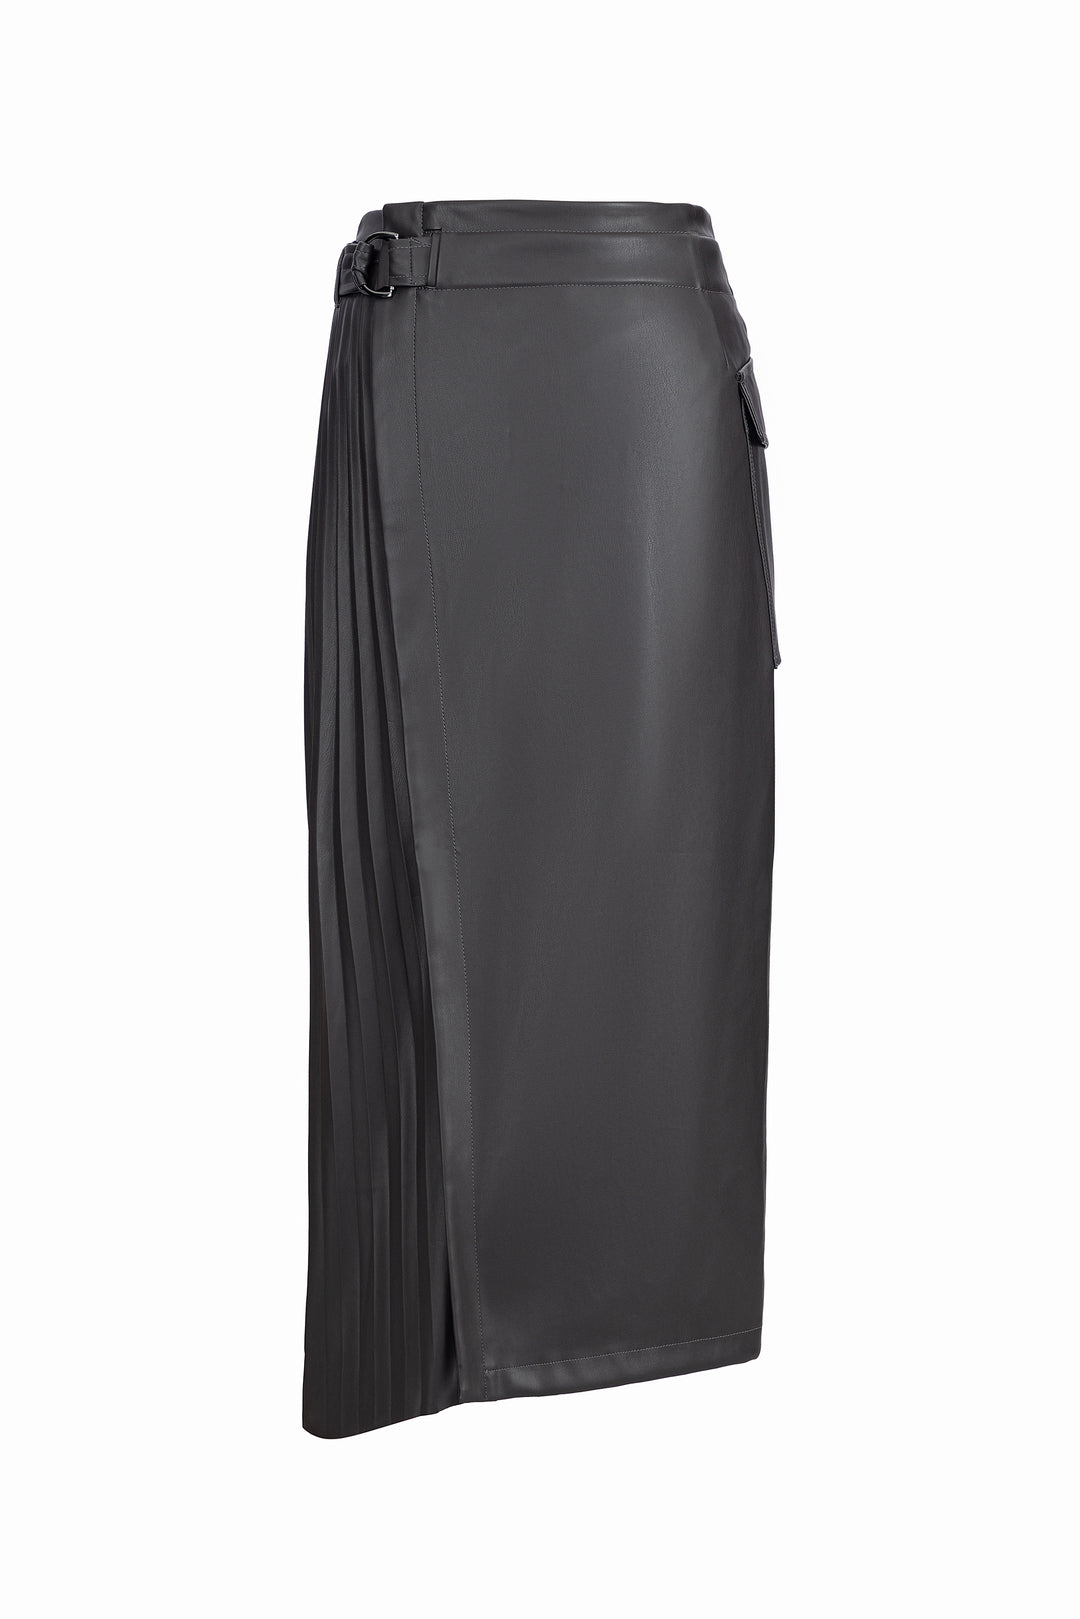 LONG FAUX LEATHER SKIRT - URBANCODE